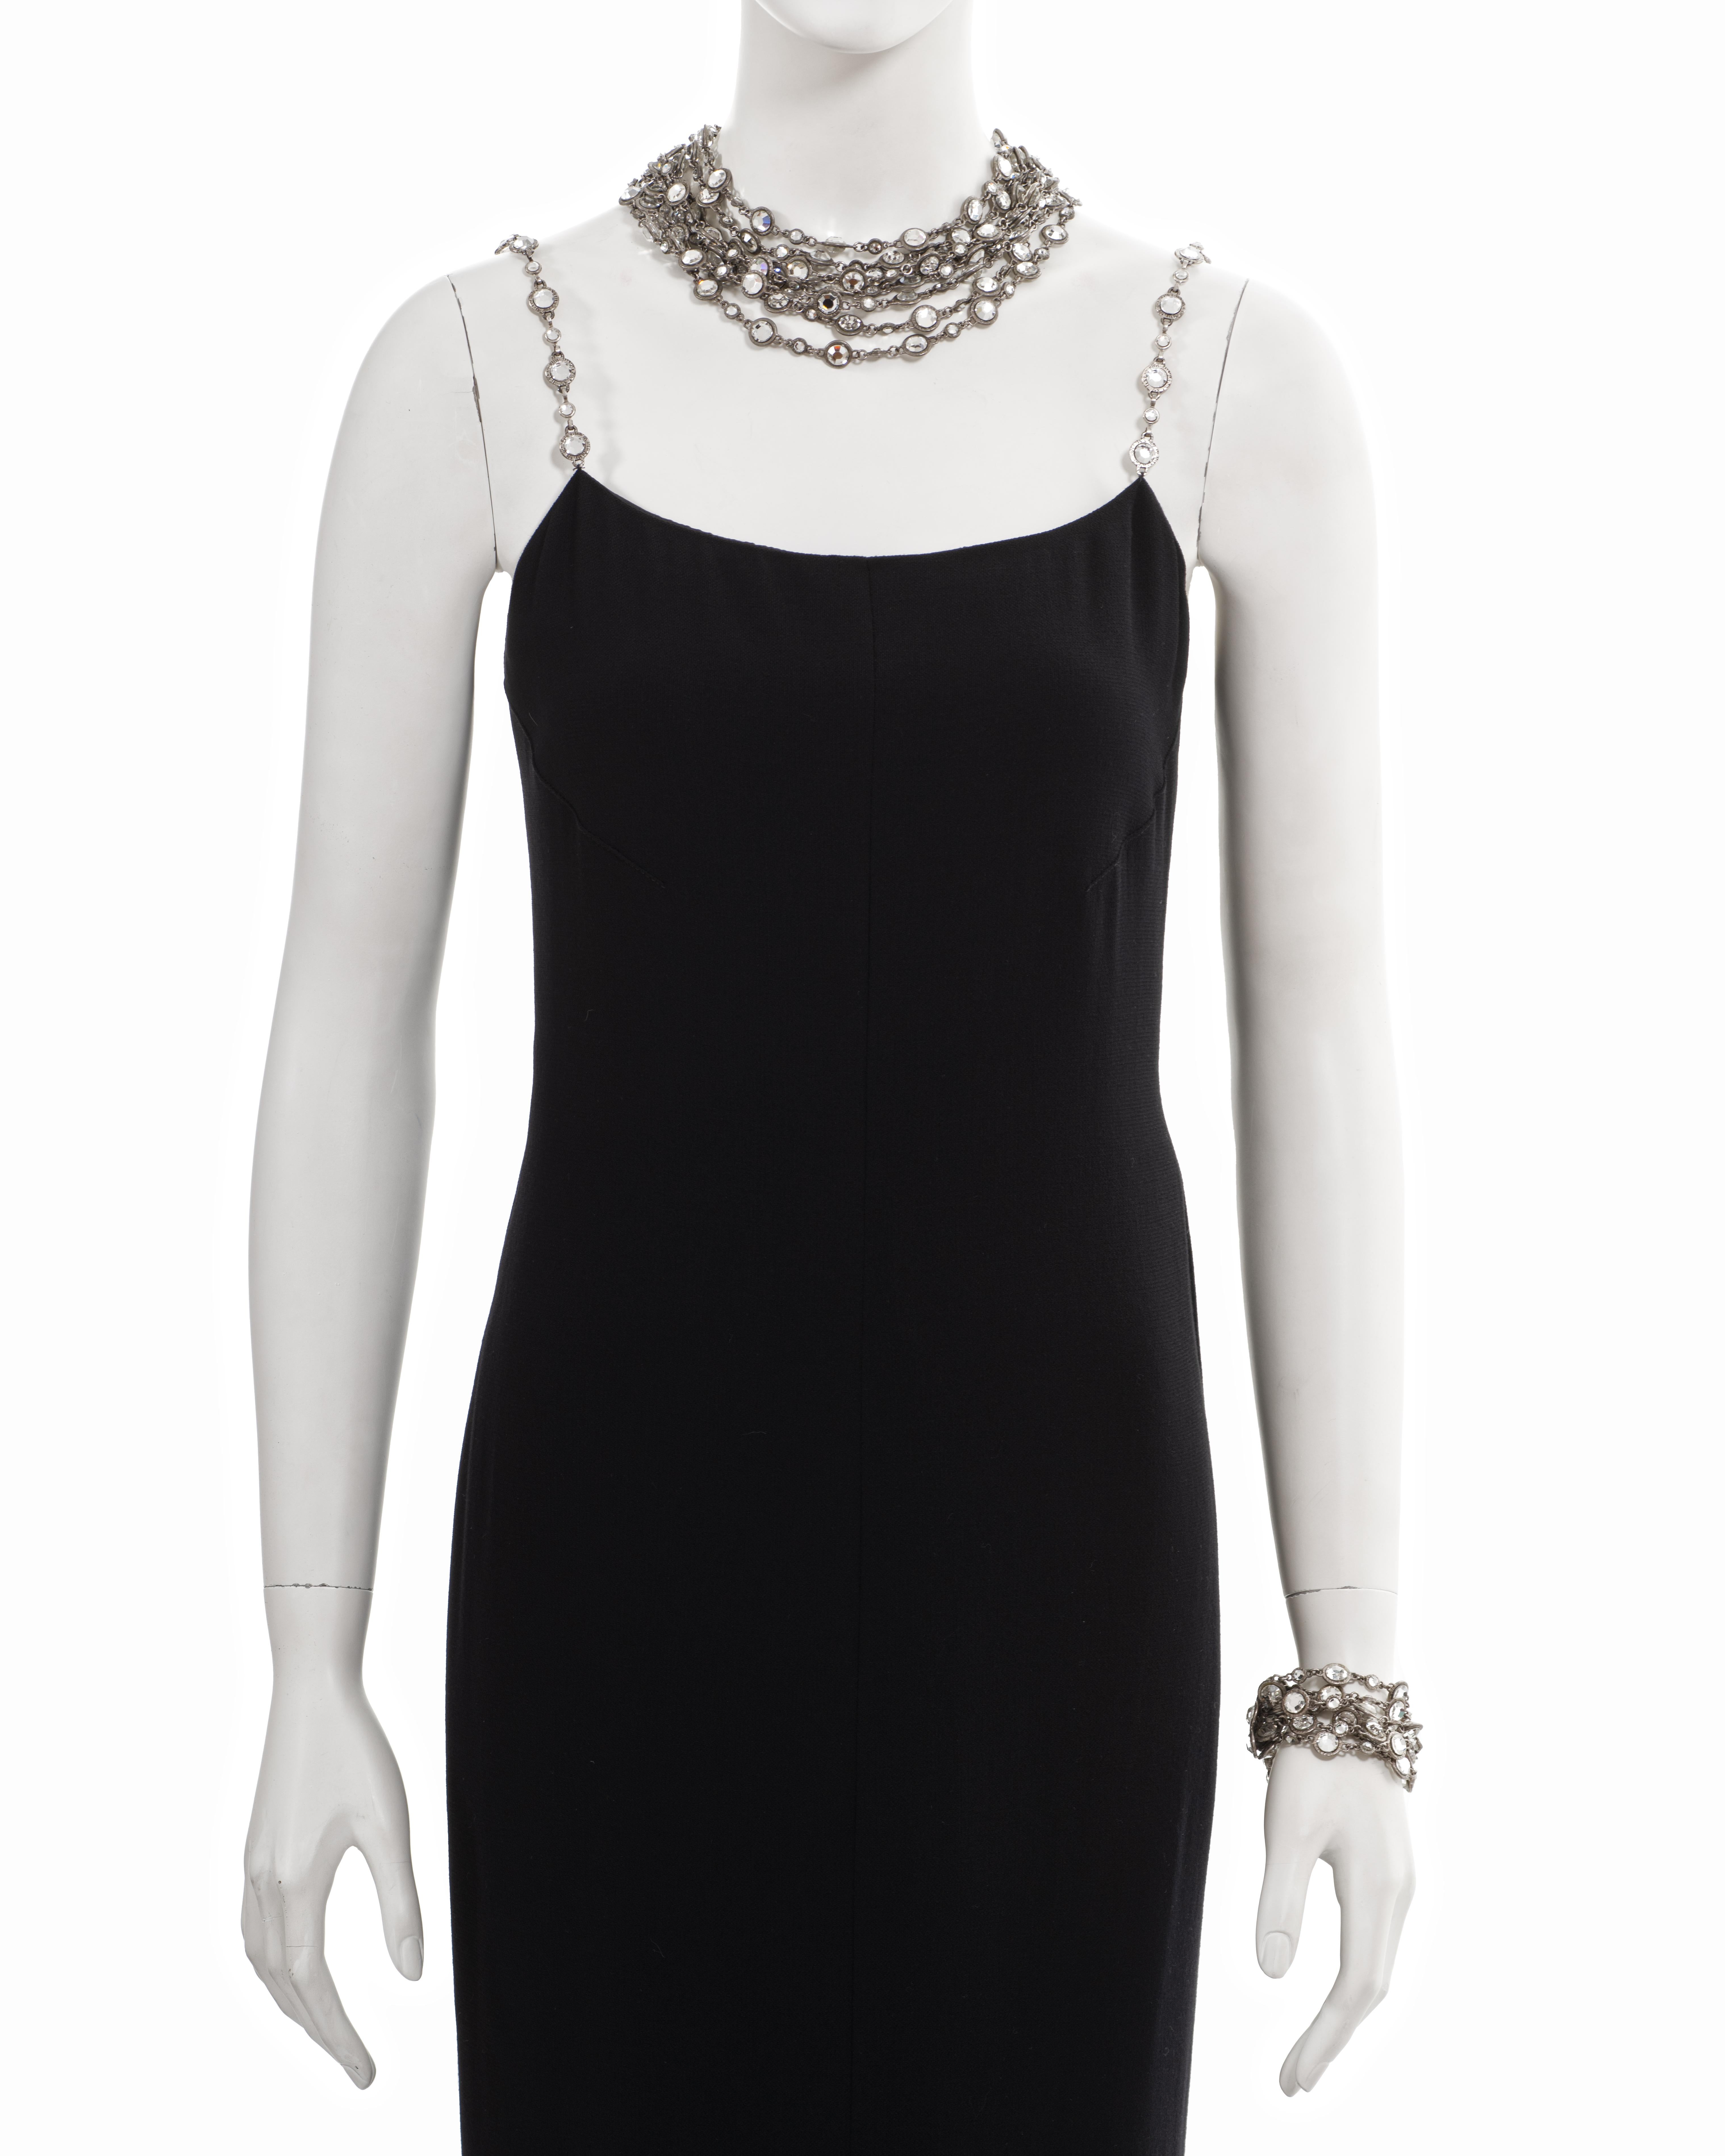 Women's Chanel by Karl Lagerfeld black evening dress with crystal jewellery set, ss 1998 For Sale